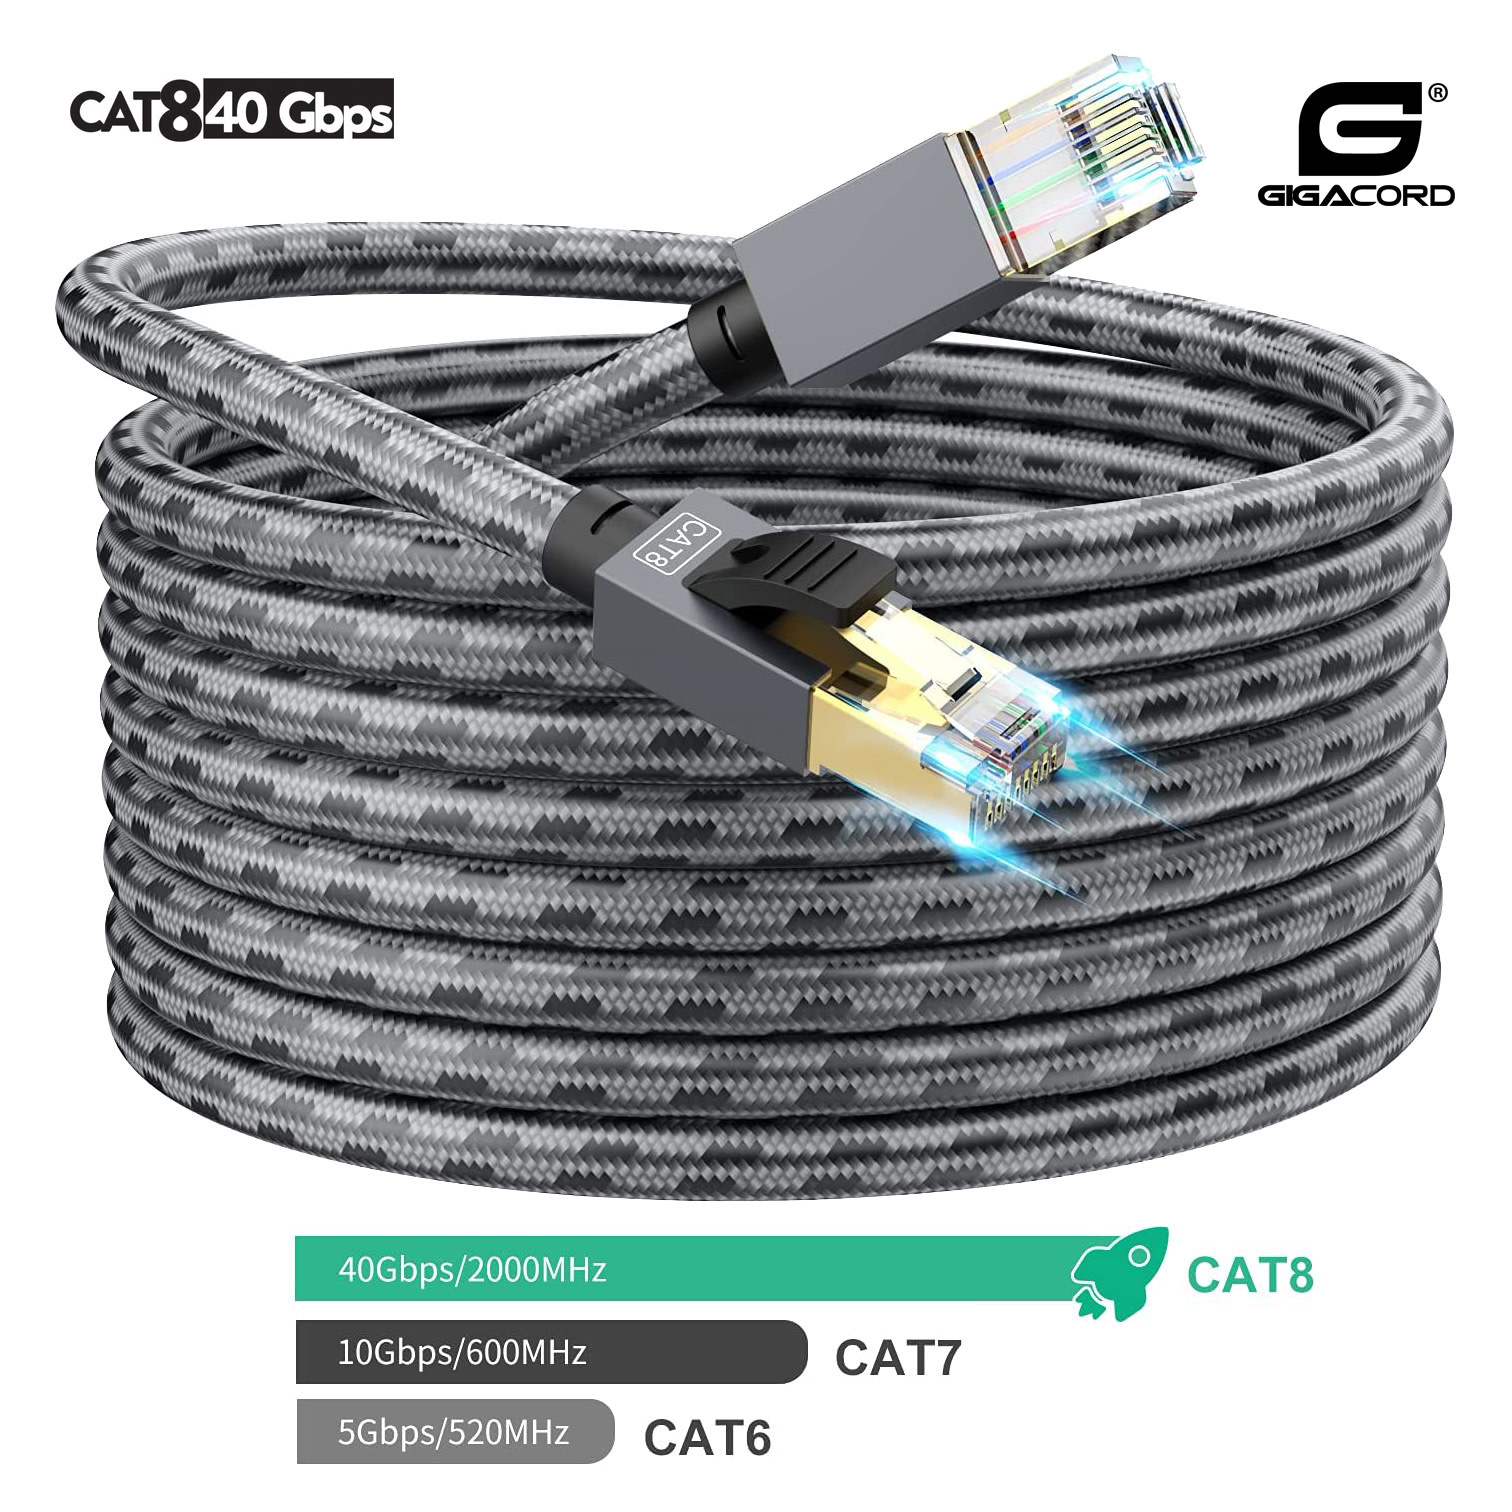 Gigacord 50 Foot Cat 8 Ethernet Cable Heavy Duty 26AWG Nylon